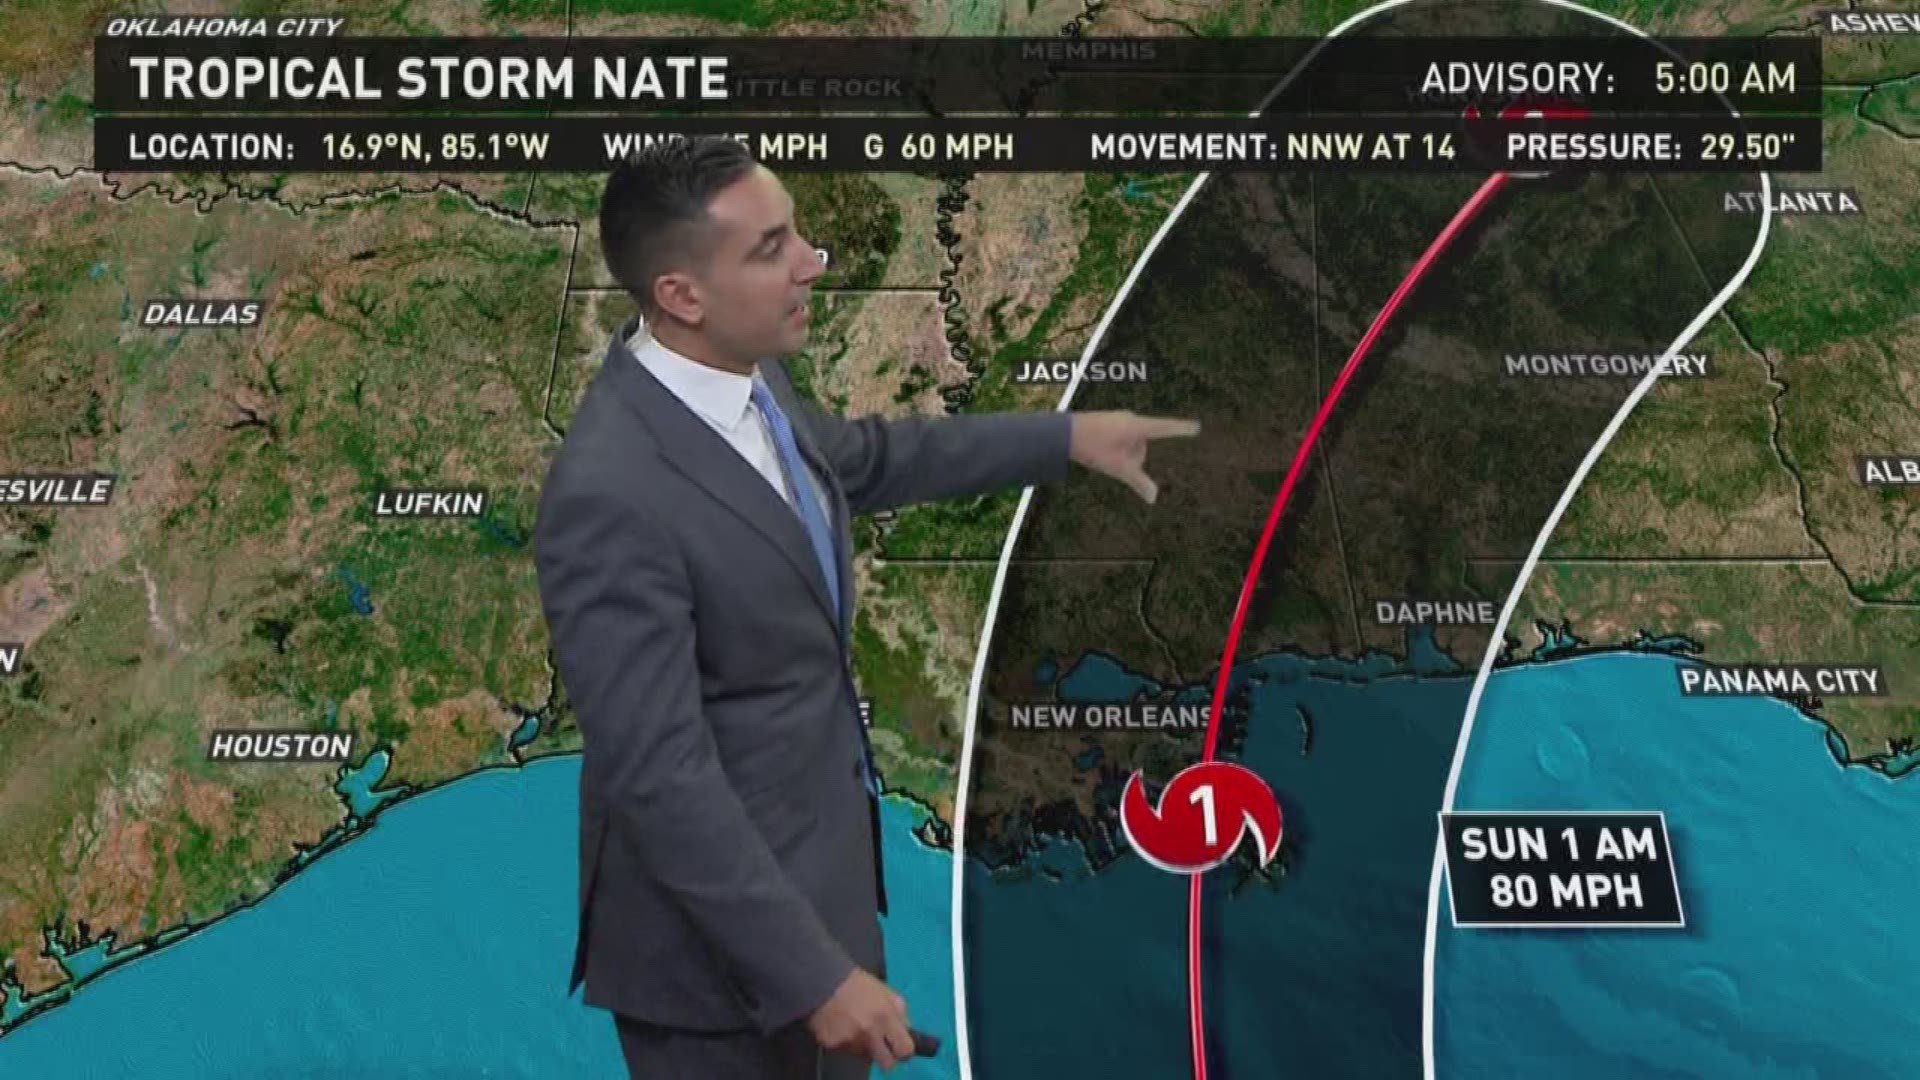 Tropical Storm Nate Update on Friday morning